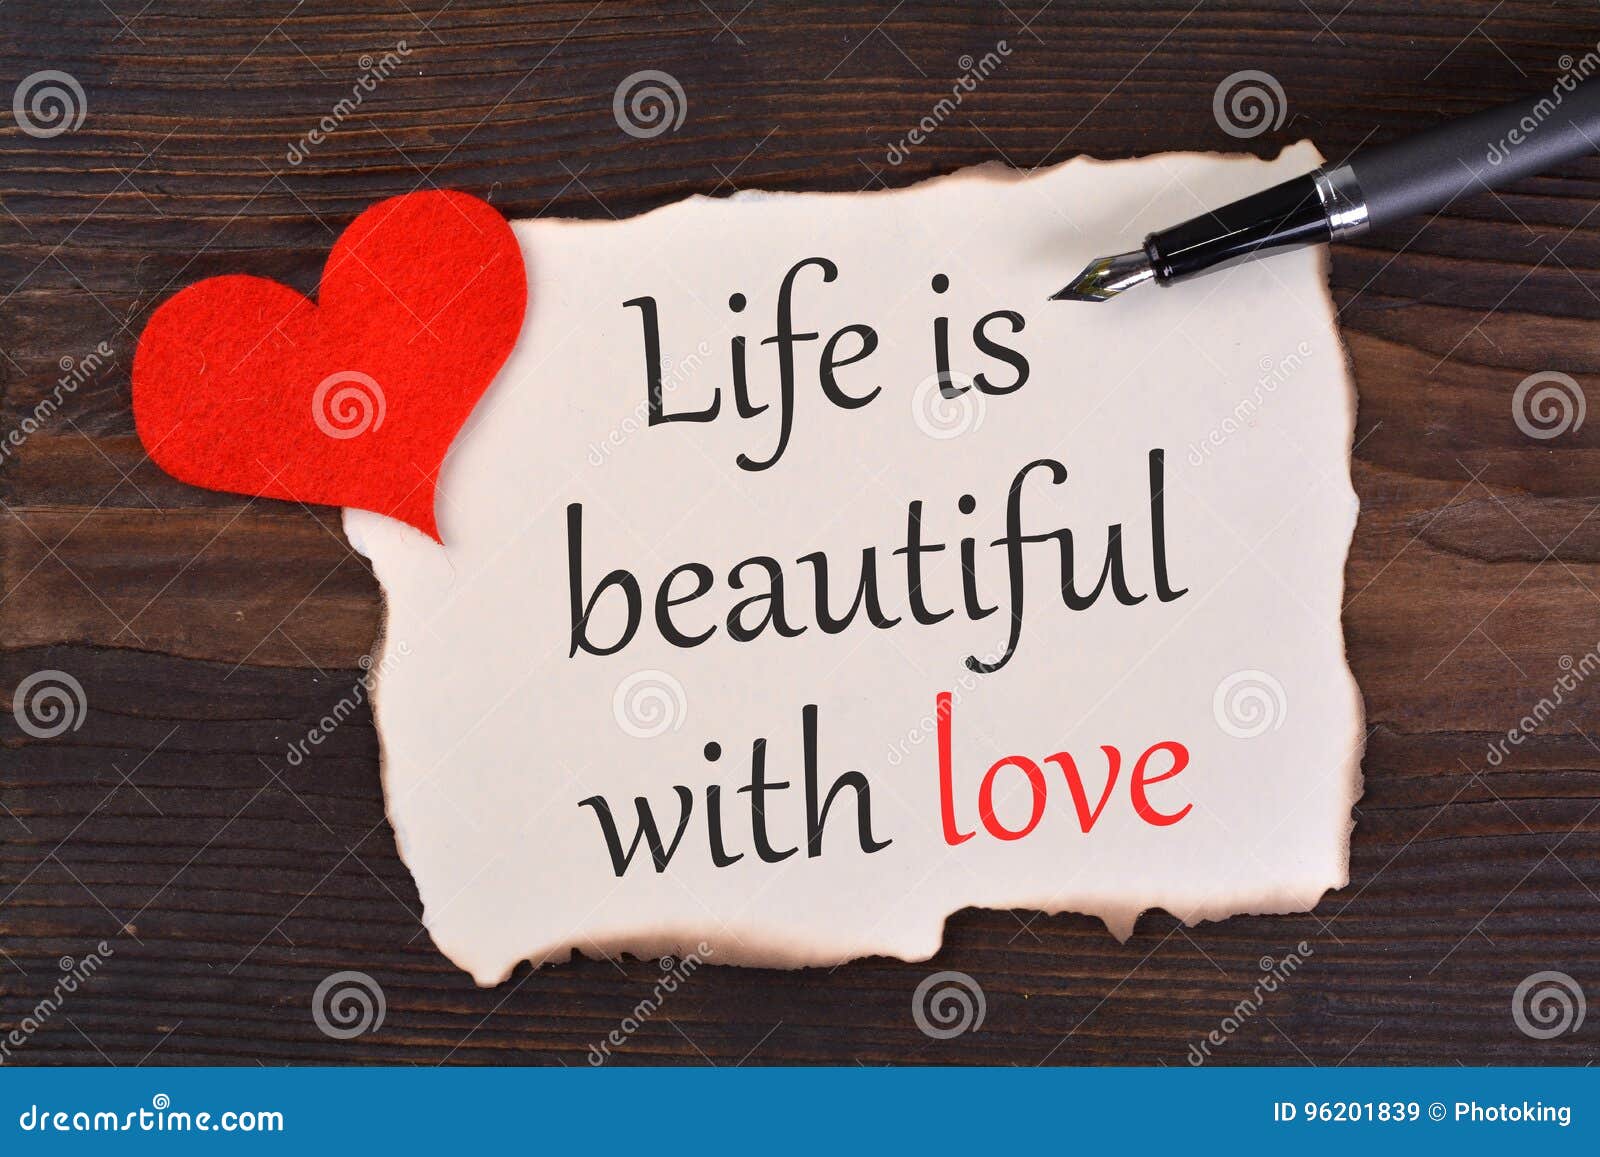 Life in Beautiful with Love Stock Image - Image of brown, life ...